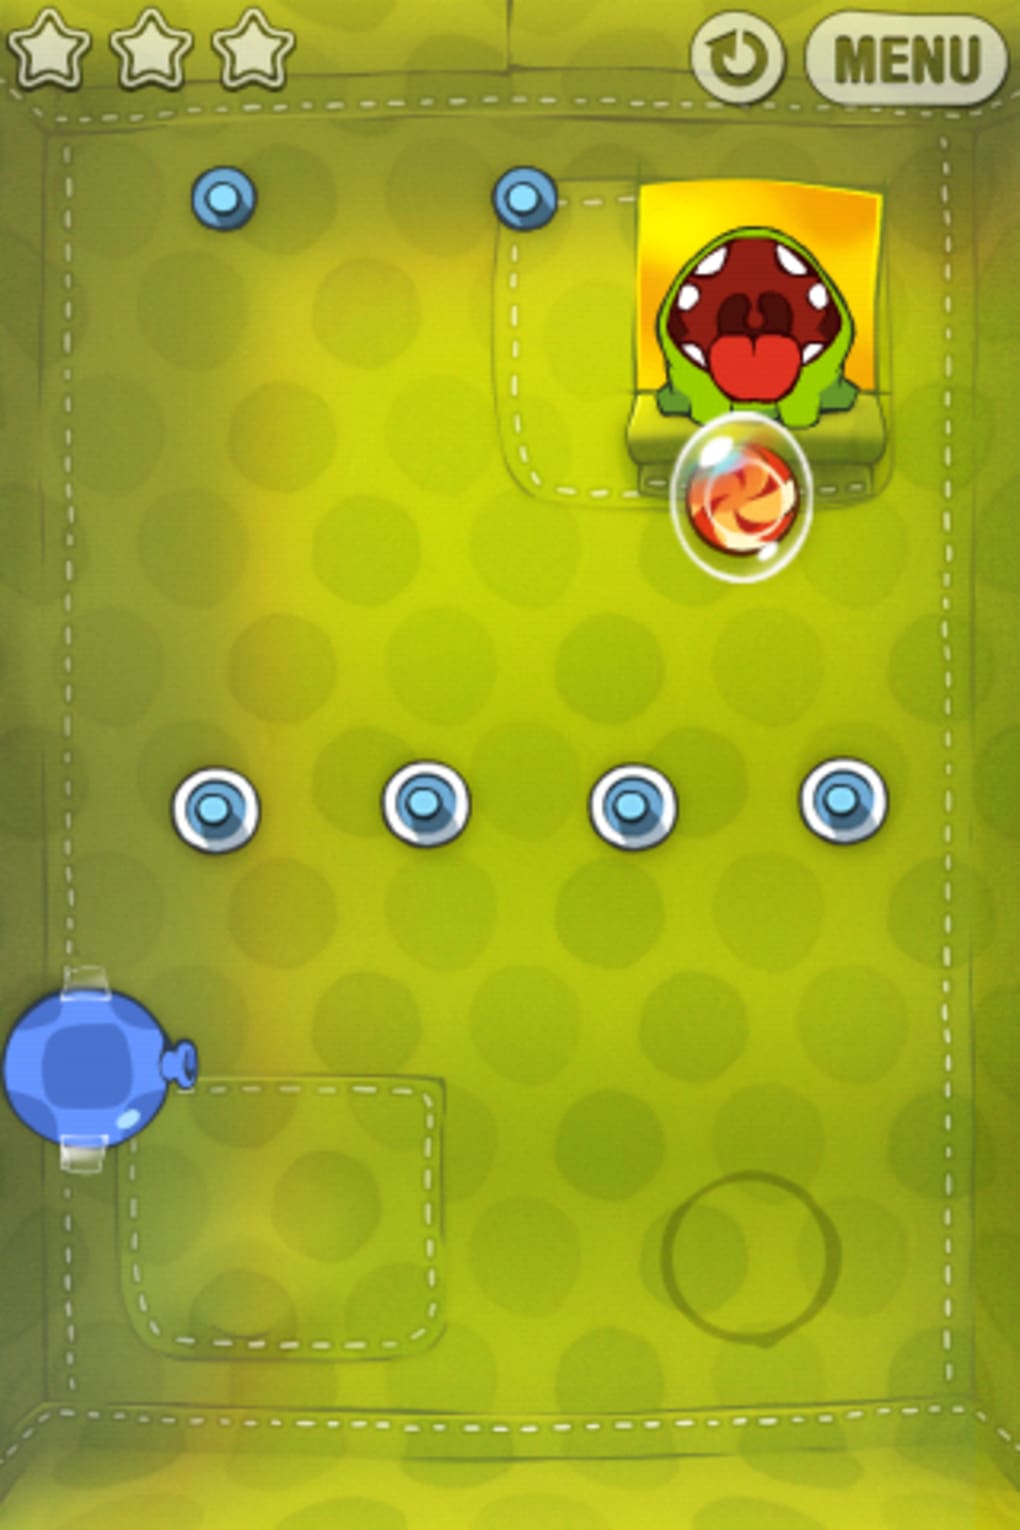 Cut the Rope 2 Box Shot for Android - GameFAQs